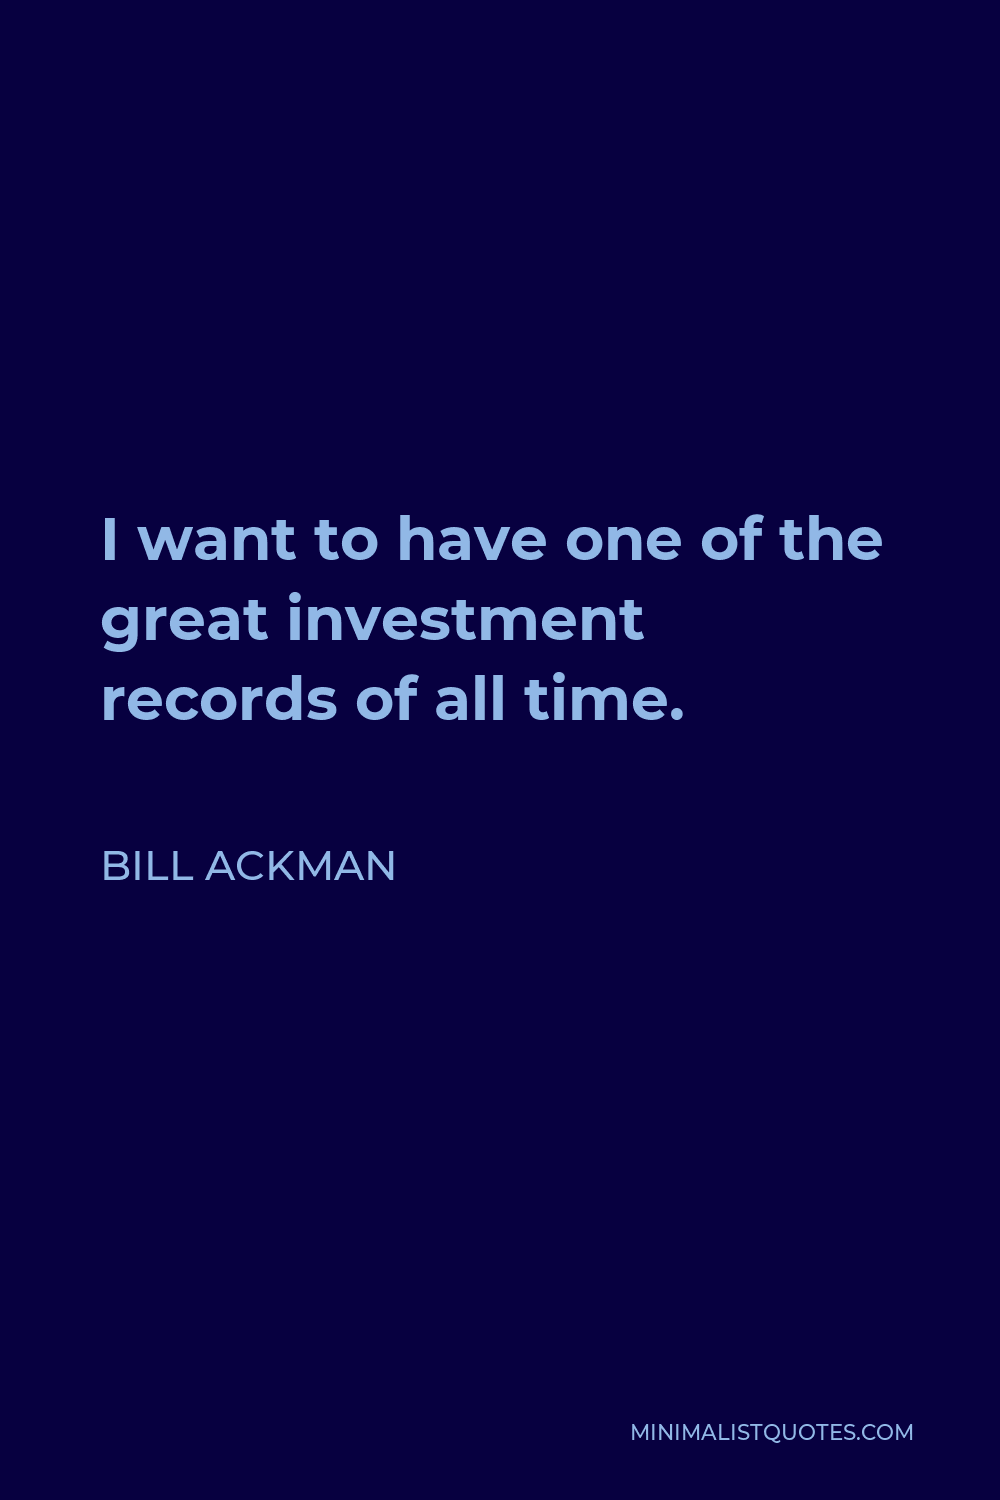 Bill Ackman Quote - I want to have one of the great investment records of all time.